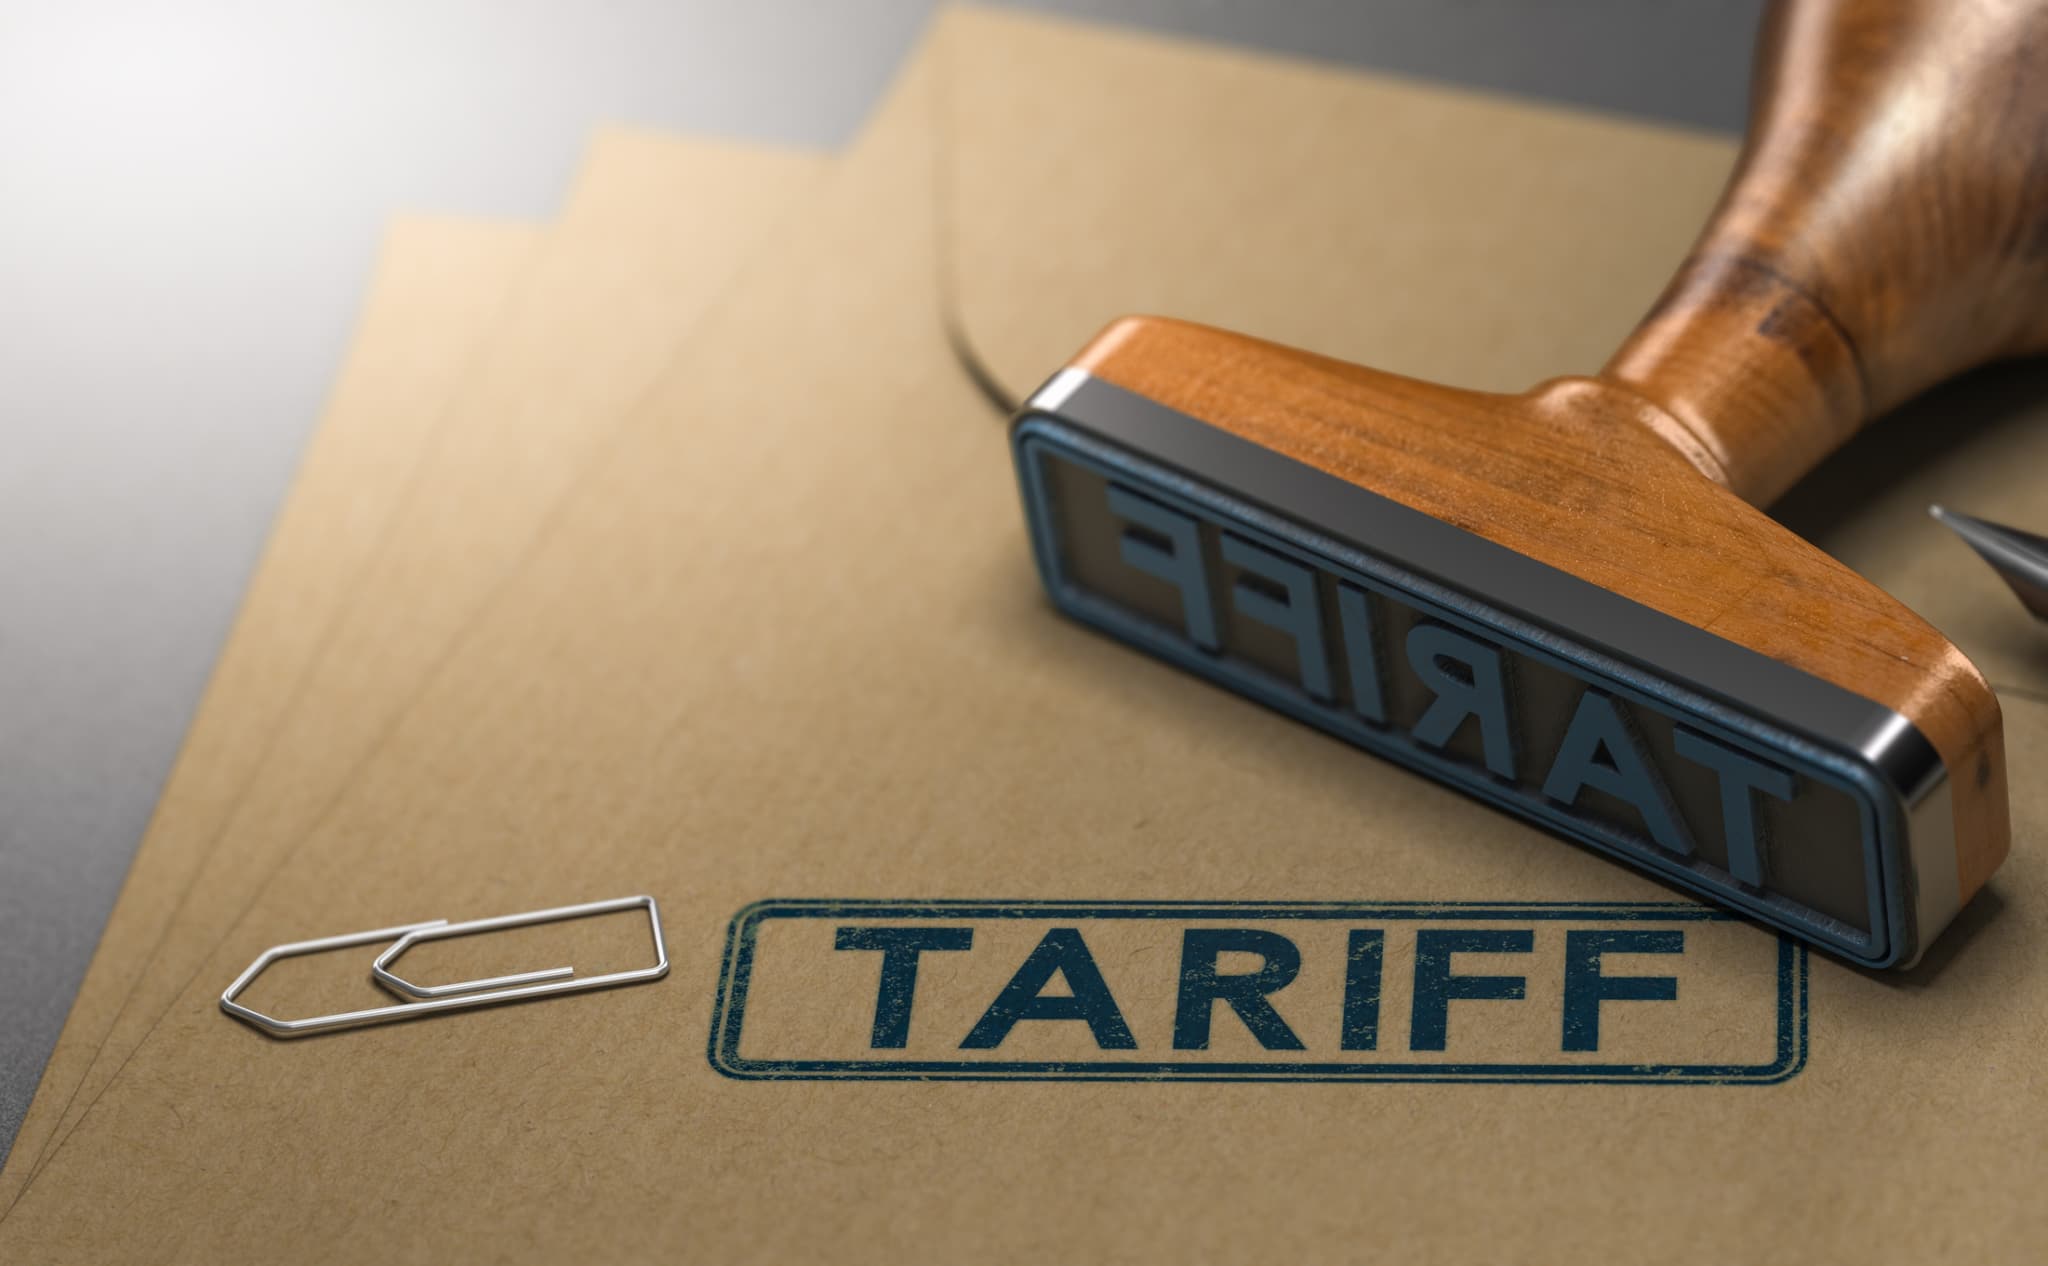 tariffs- Concept of taxes or duties on imported goods